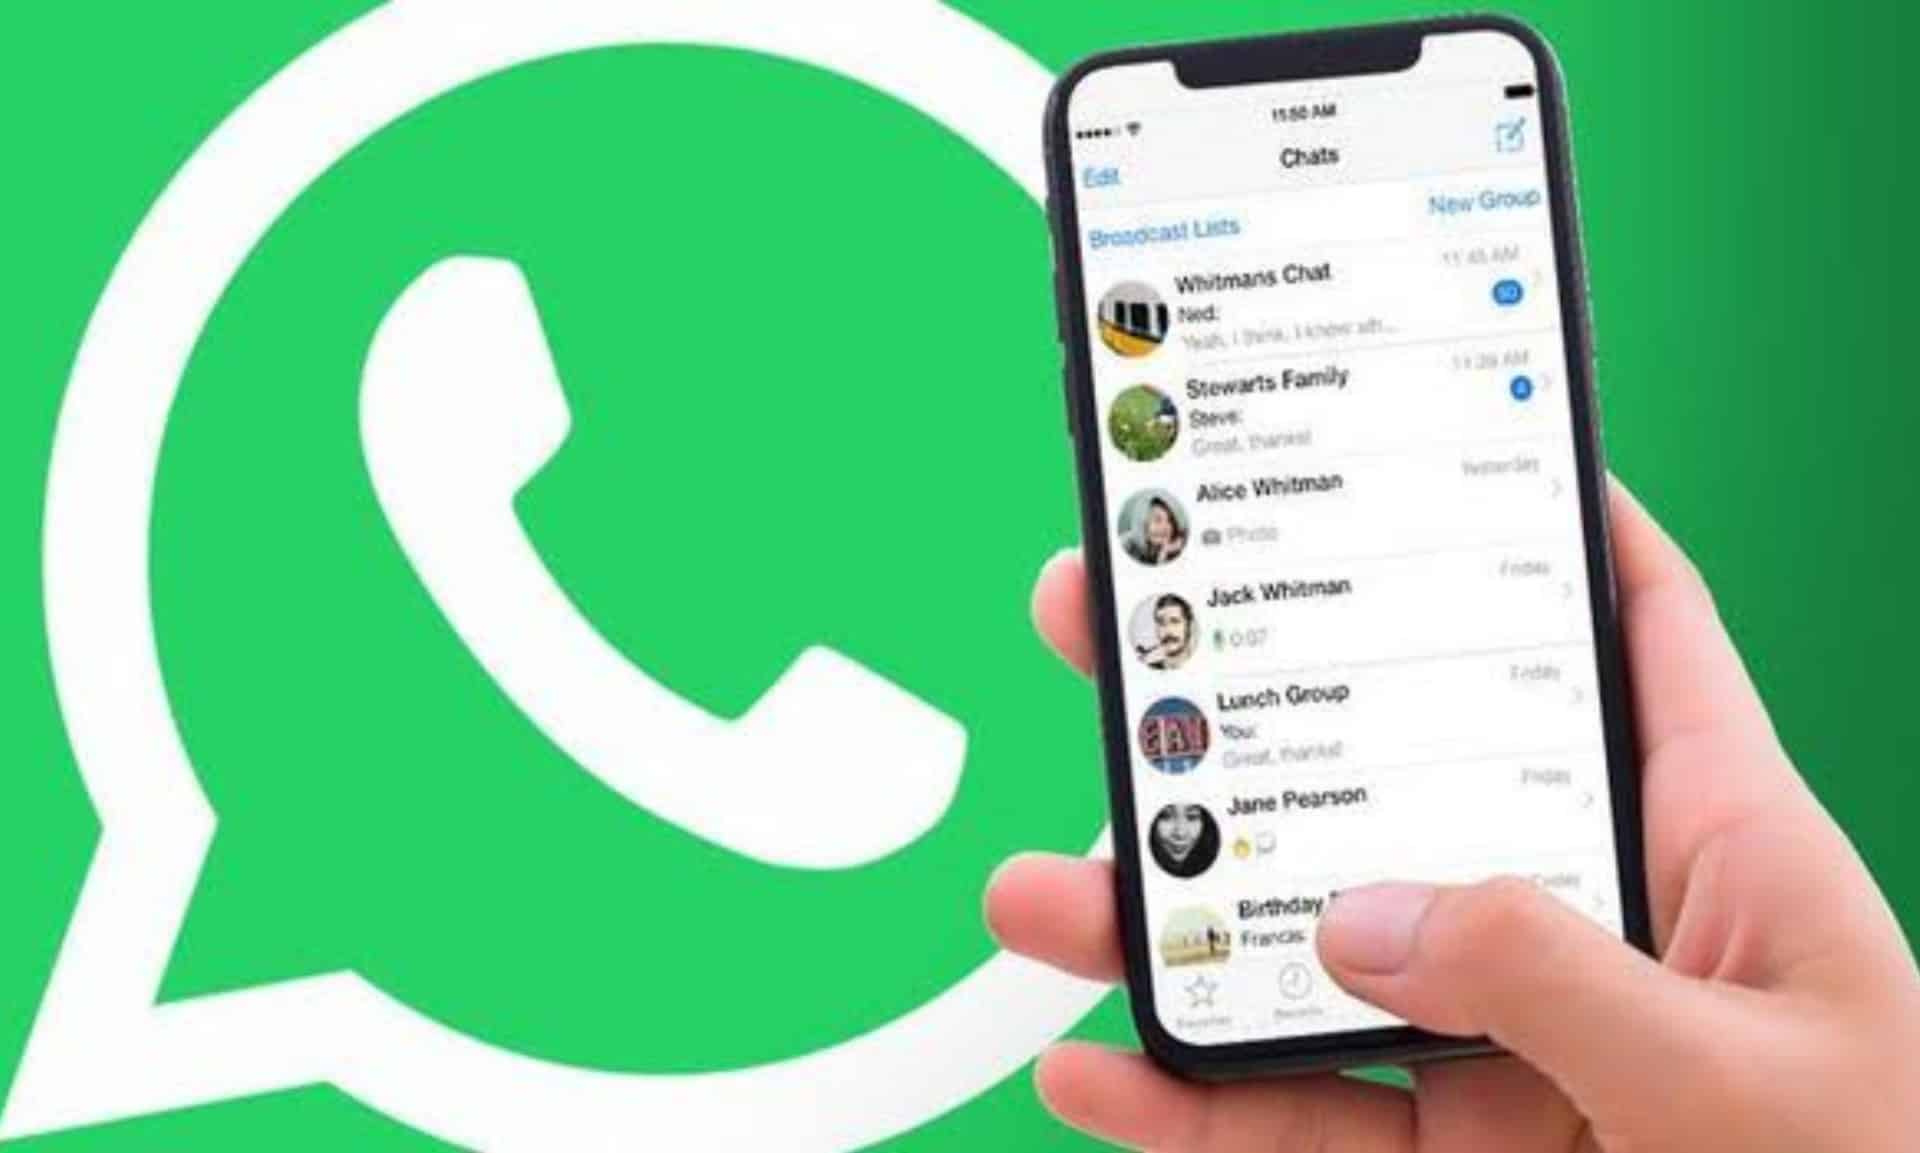 WhatsApp Announces the Upcoming Disappearing Messages Feature, May Roll Out in Next Update